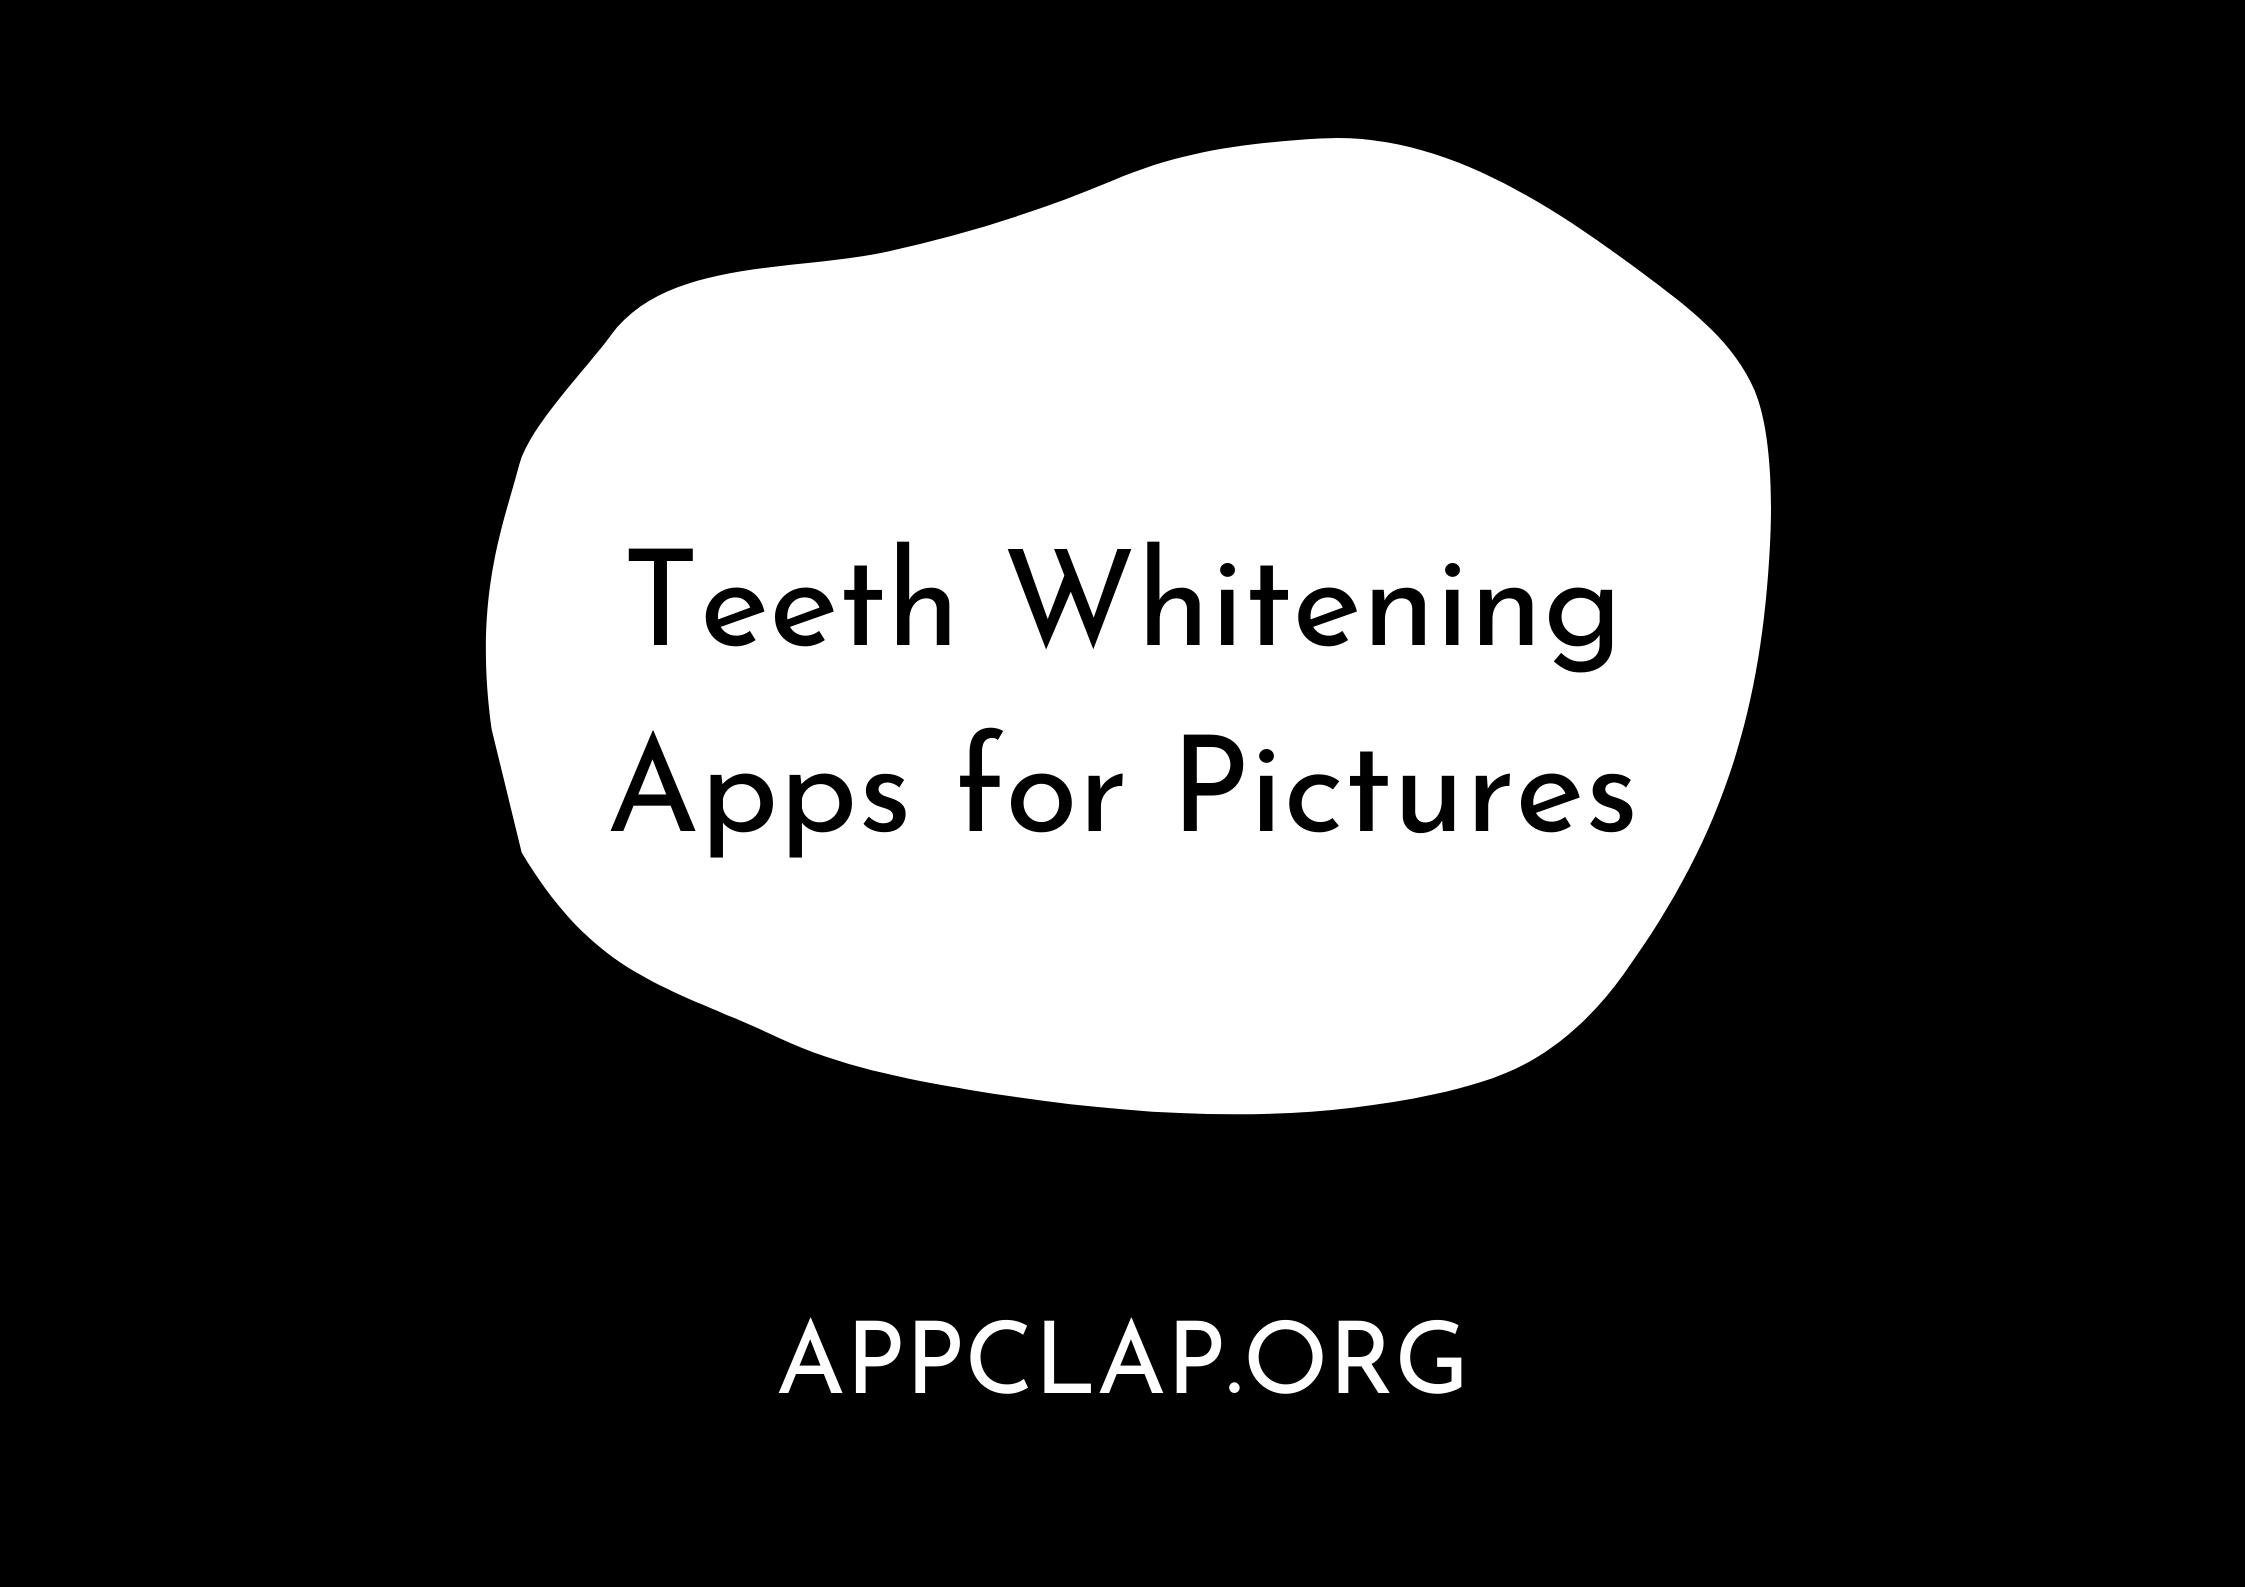 Teeth Whitening Apps for Pictures